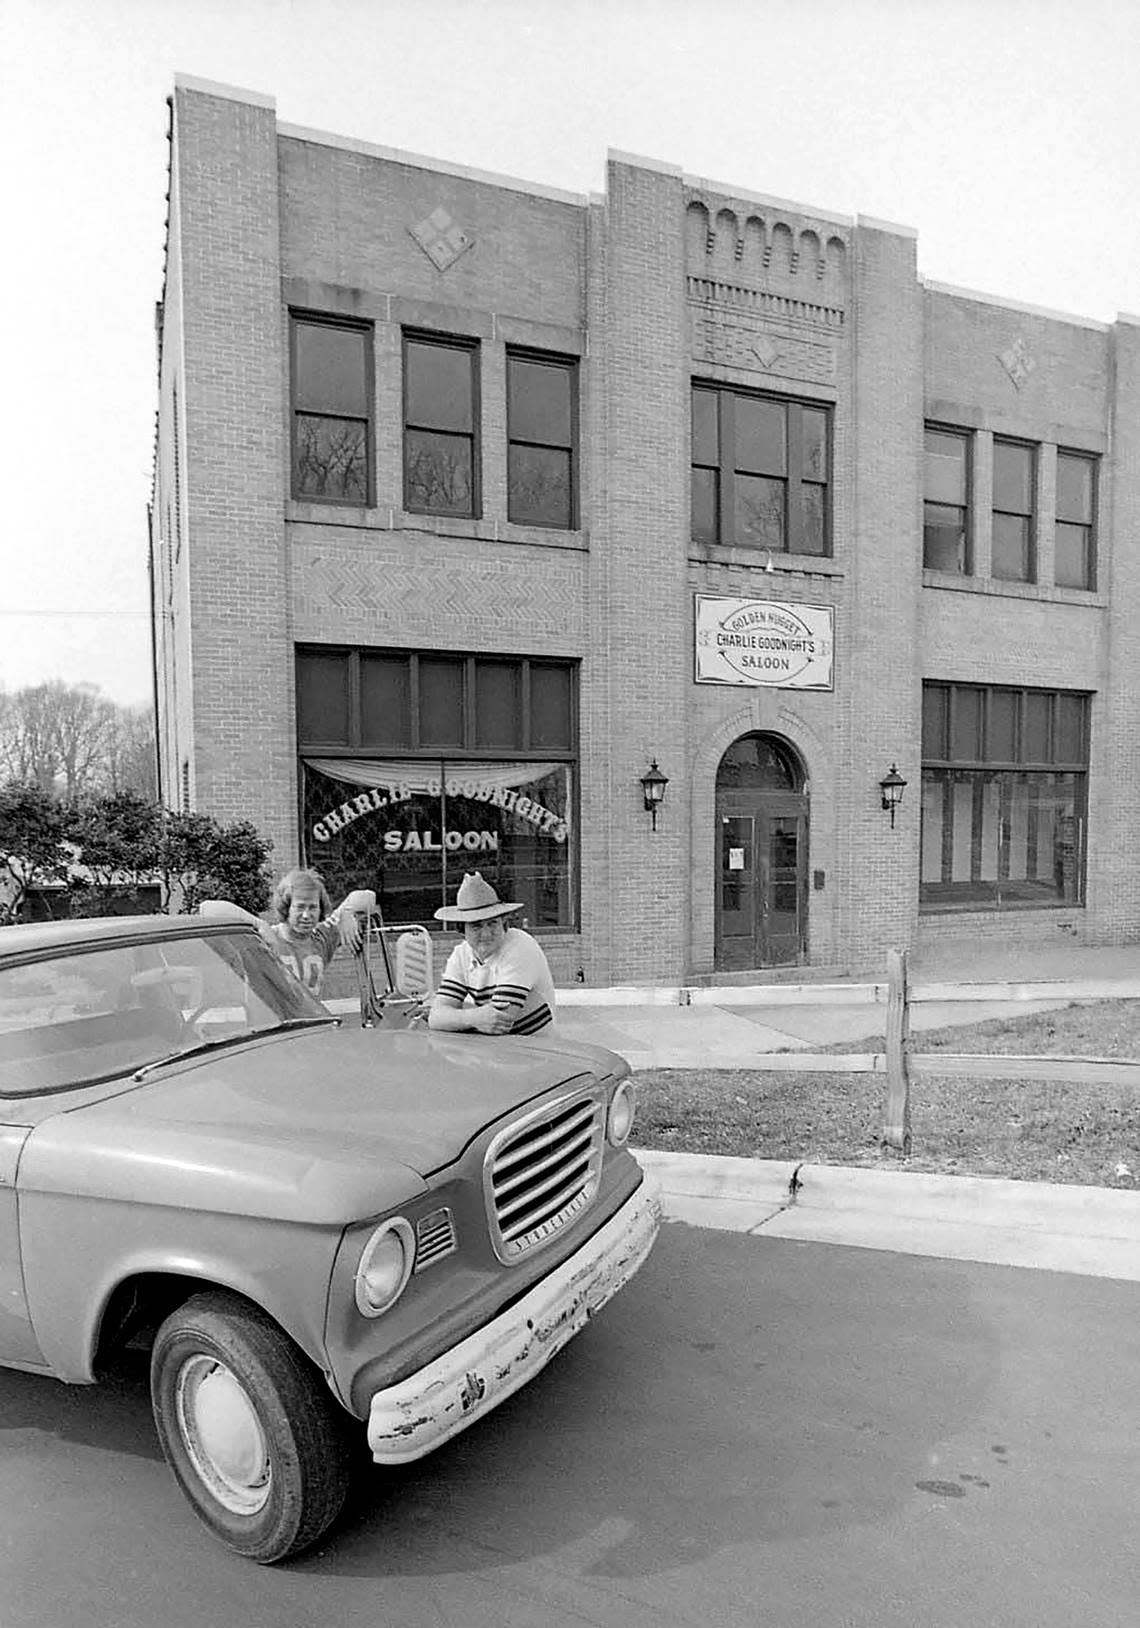 Owners, Chip Lovell (left) and Garry Hoover are seen in front of Charlie Goodnight’s Saloon, February 11, 1975.
Lovell and Hoover purchased the vacant White’s Dairy Building in  1974 for $75,000 and renovated the interior, eventually opening Charlie Goodnight’s Saloon in 1974. 